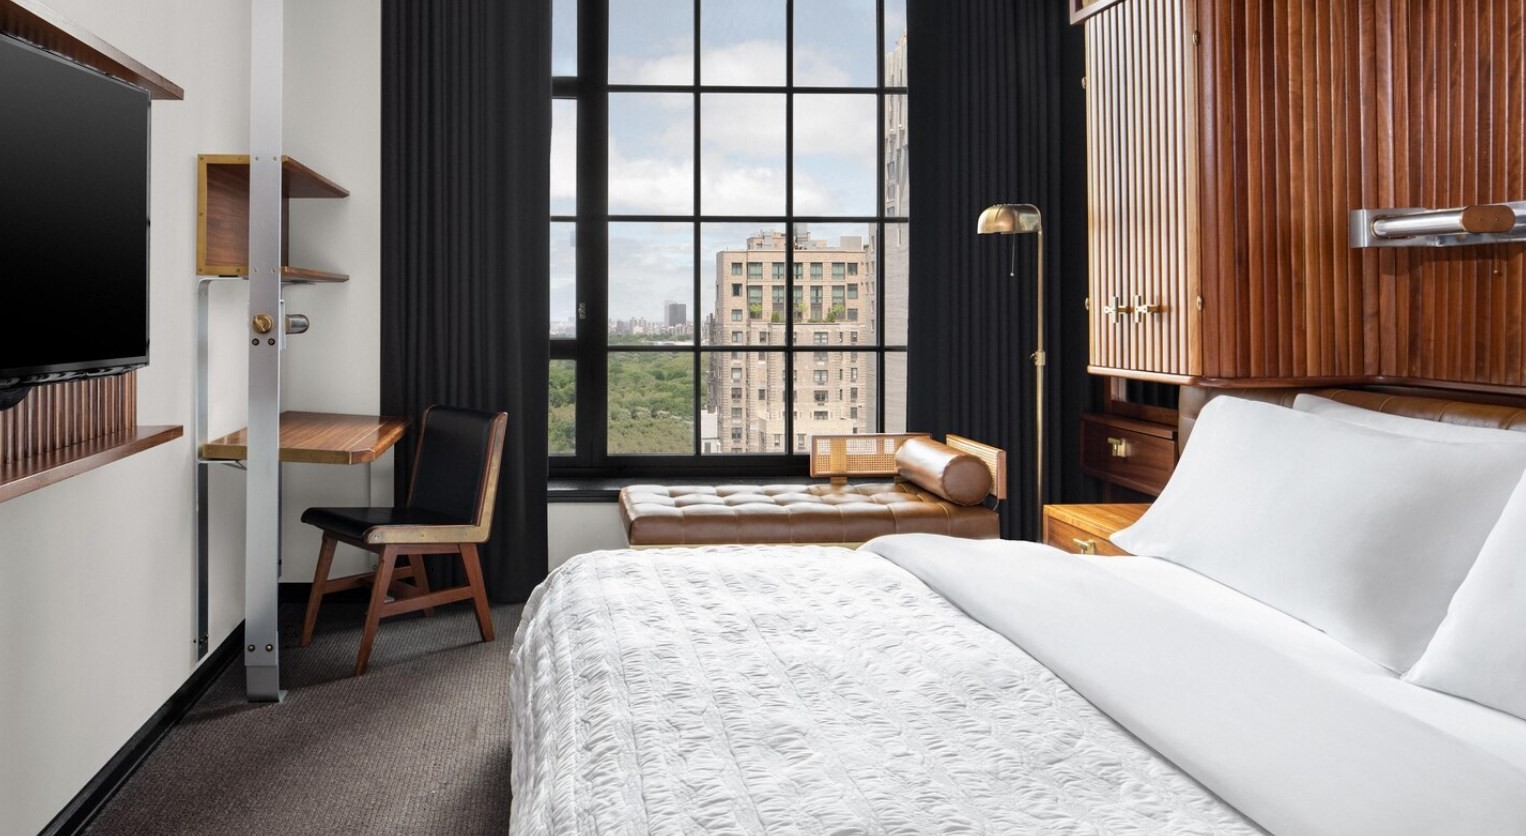 news-main-le-meridien-opens-first-property-in-new-york.1566555693.jpg